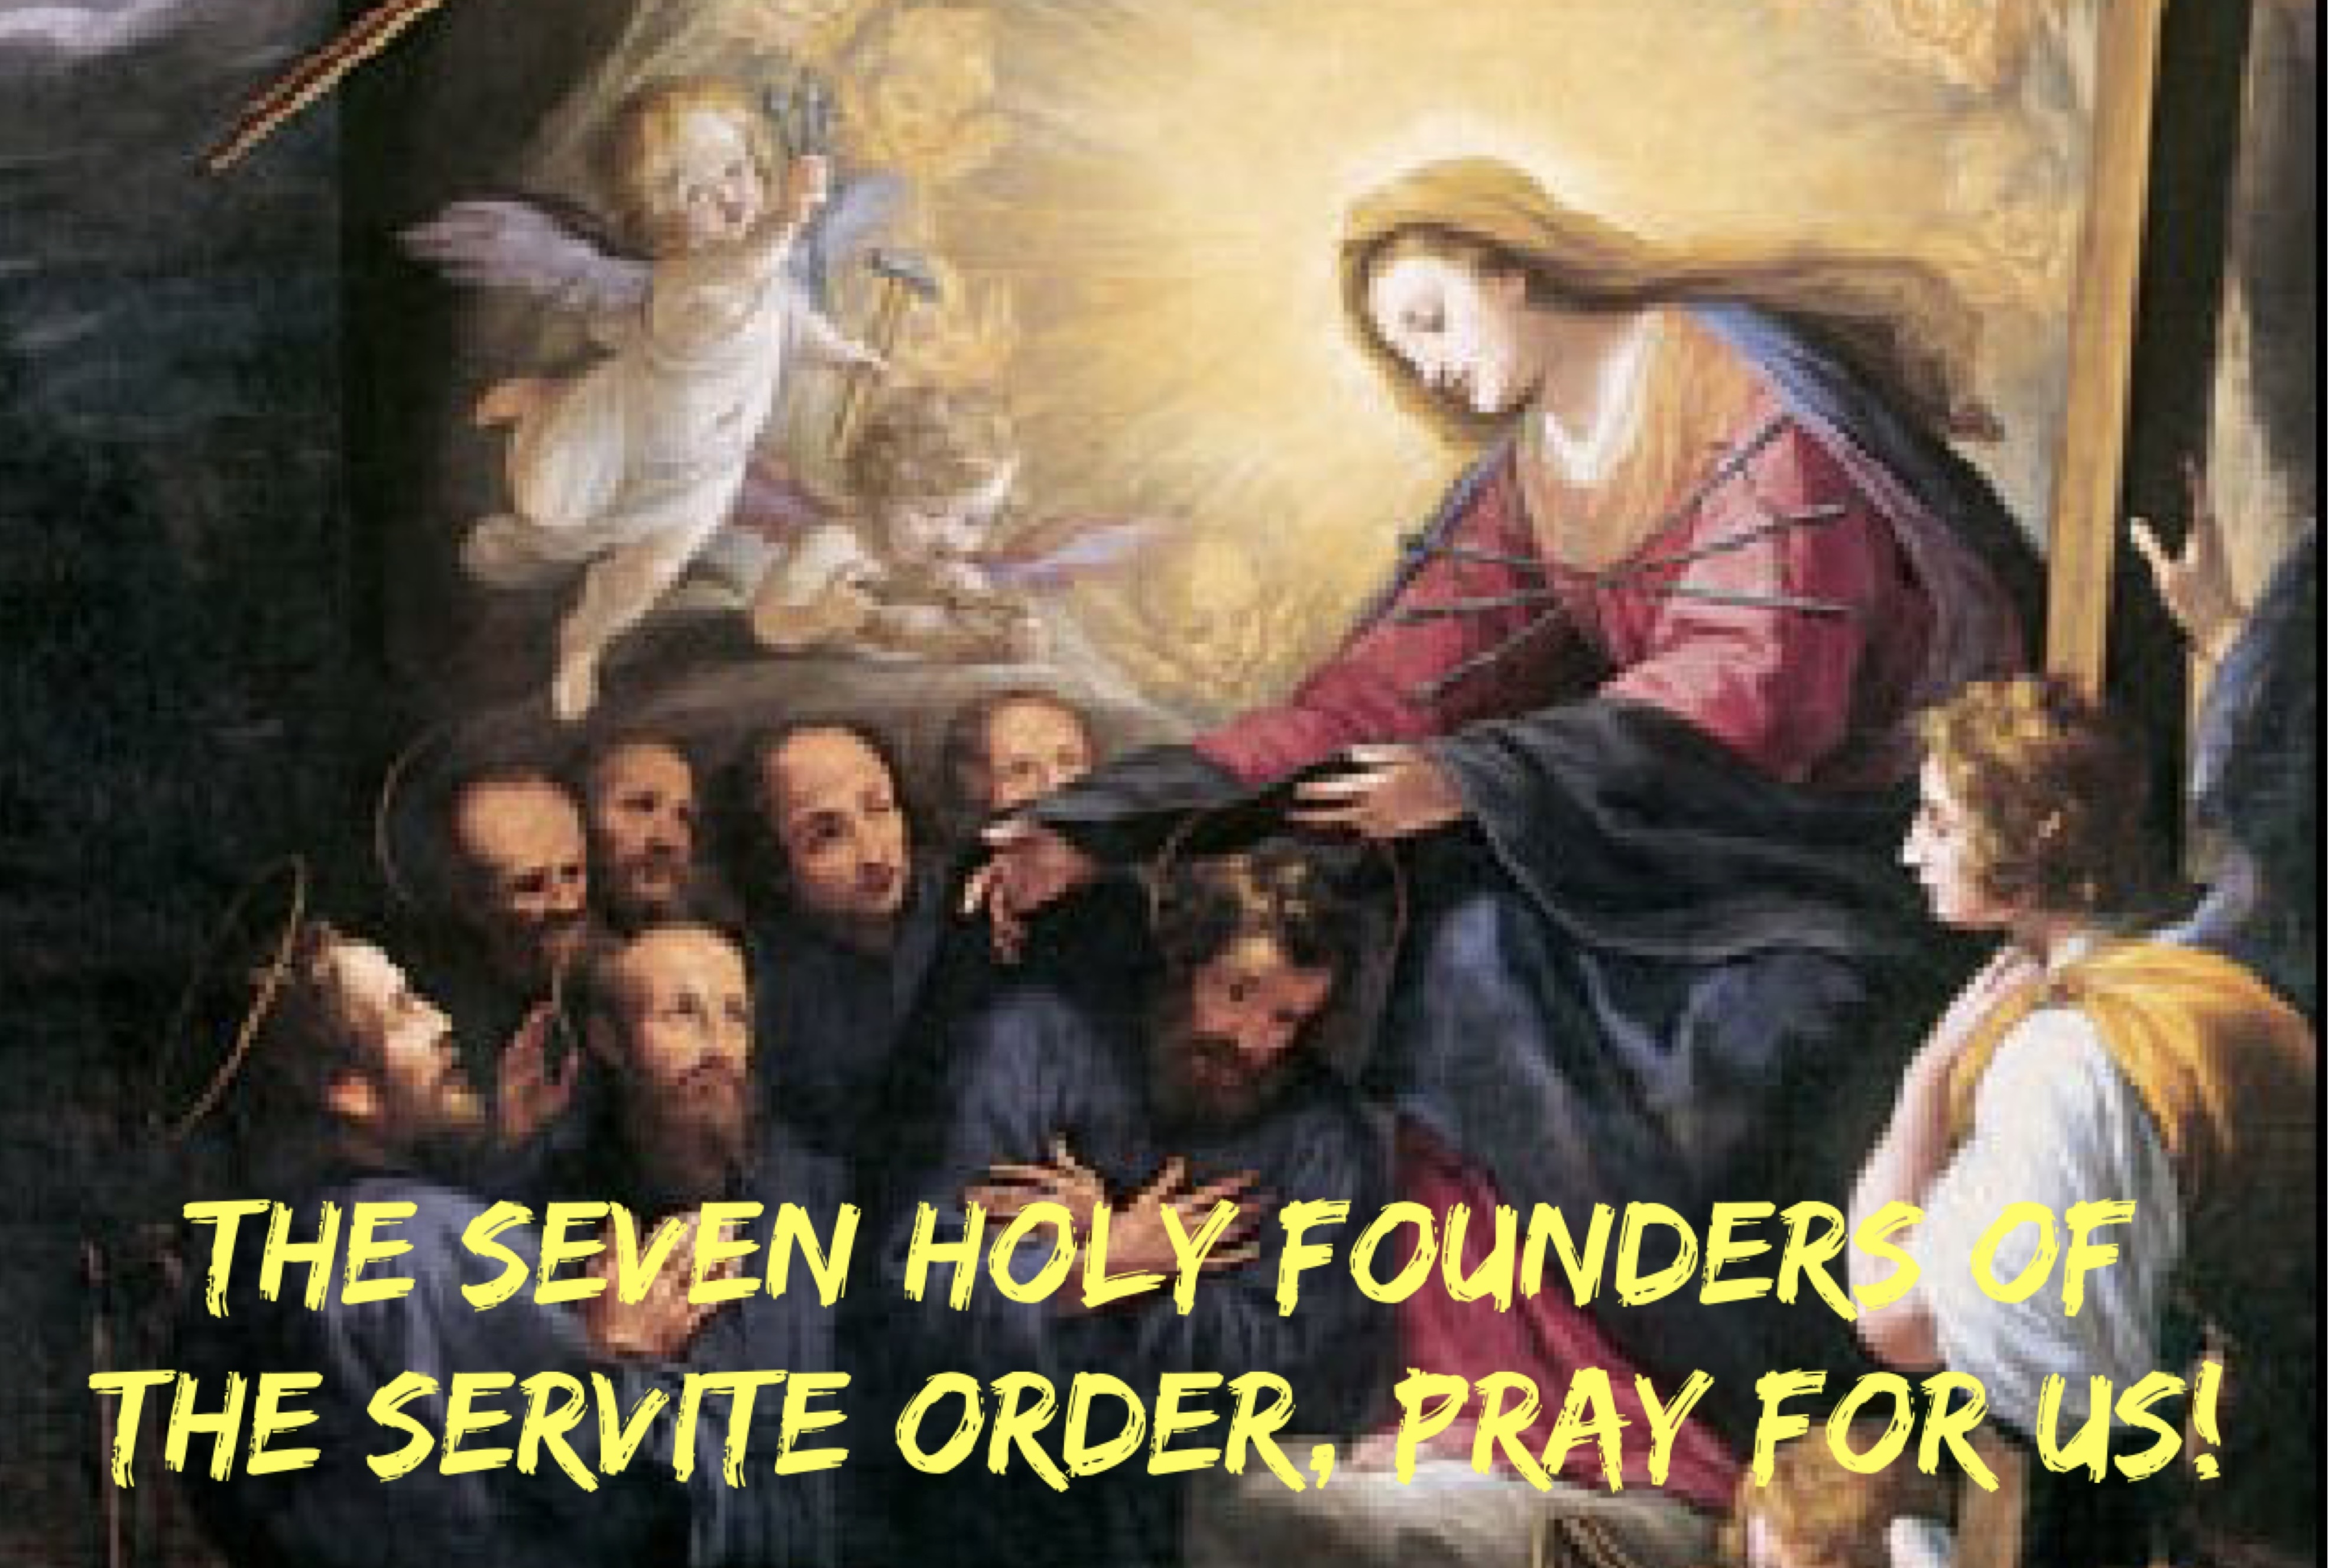 17th February - The Seven Holy Founders of the Servite Order